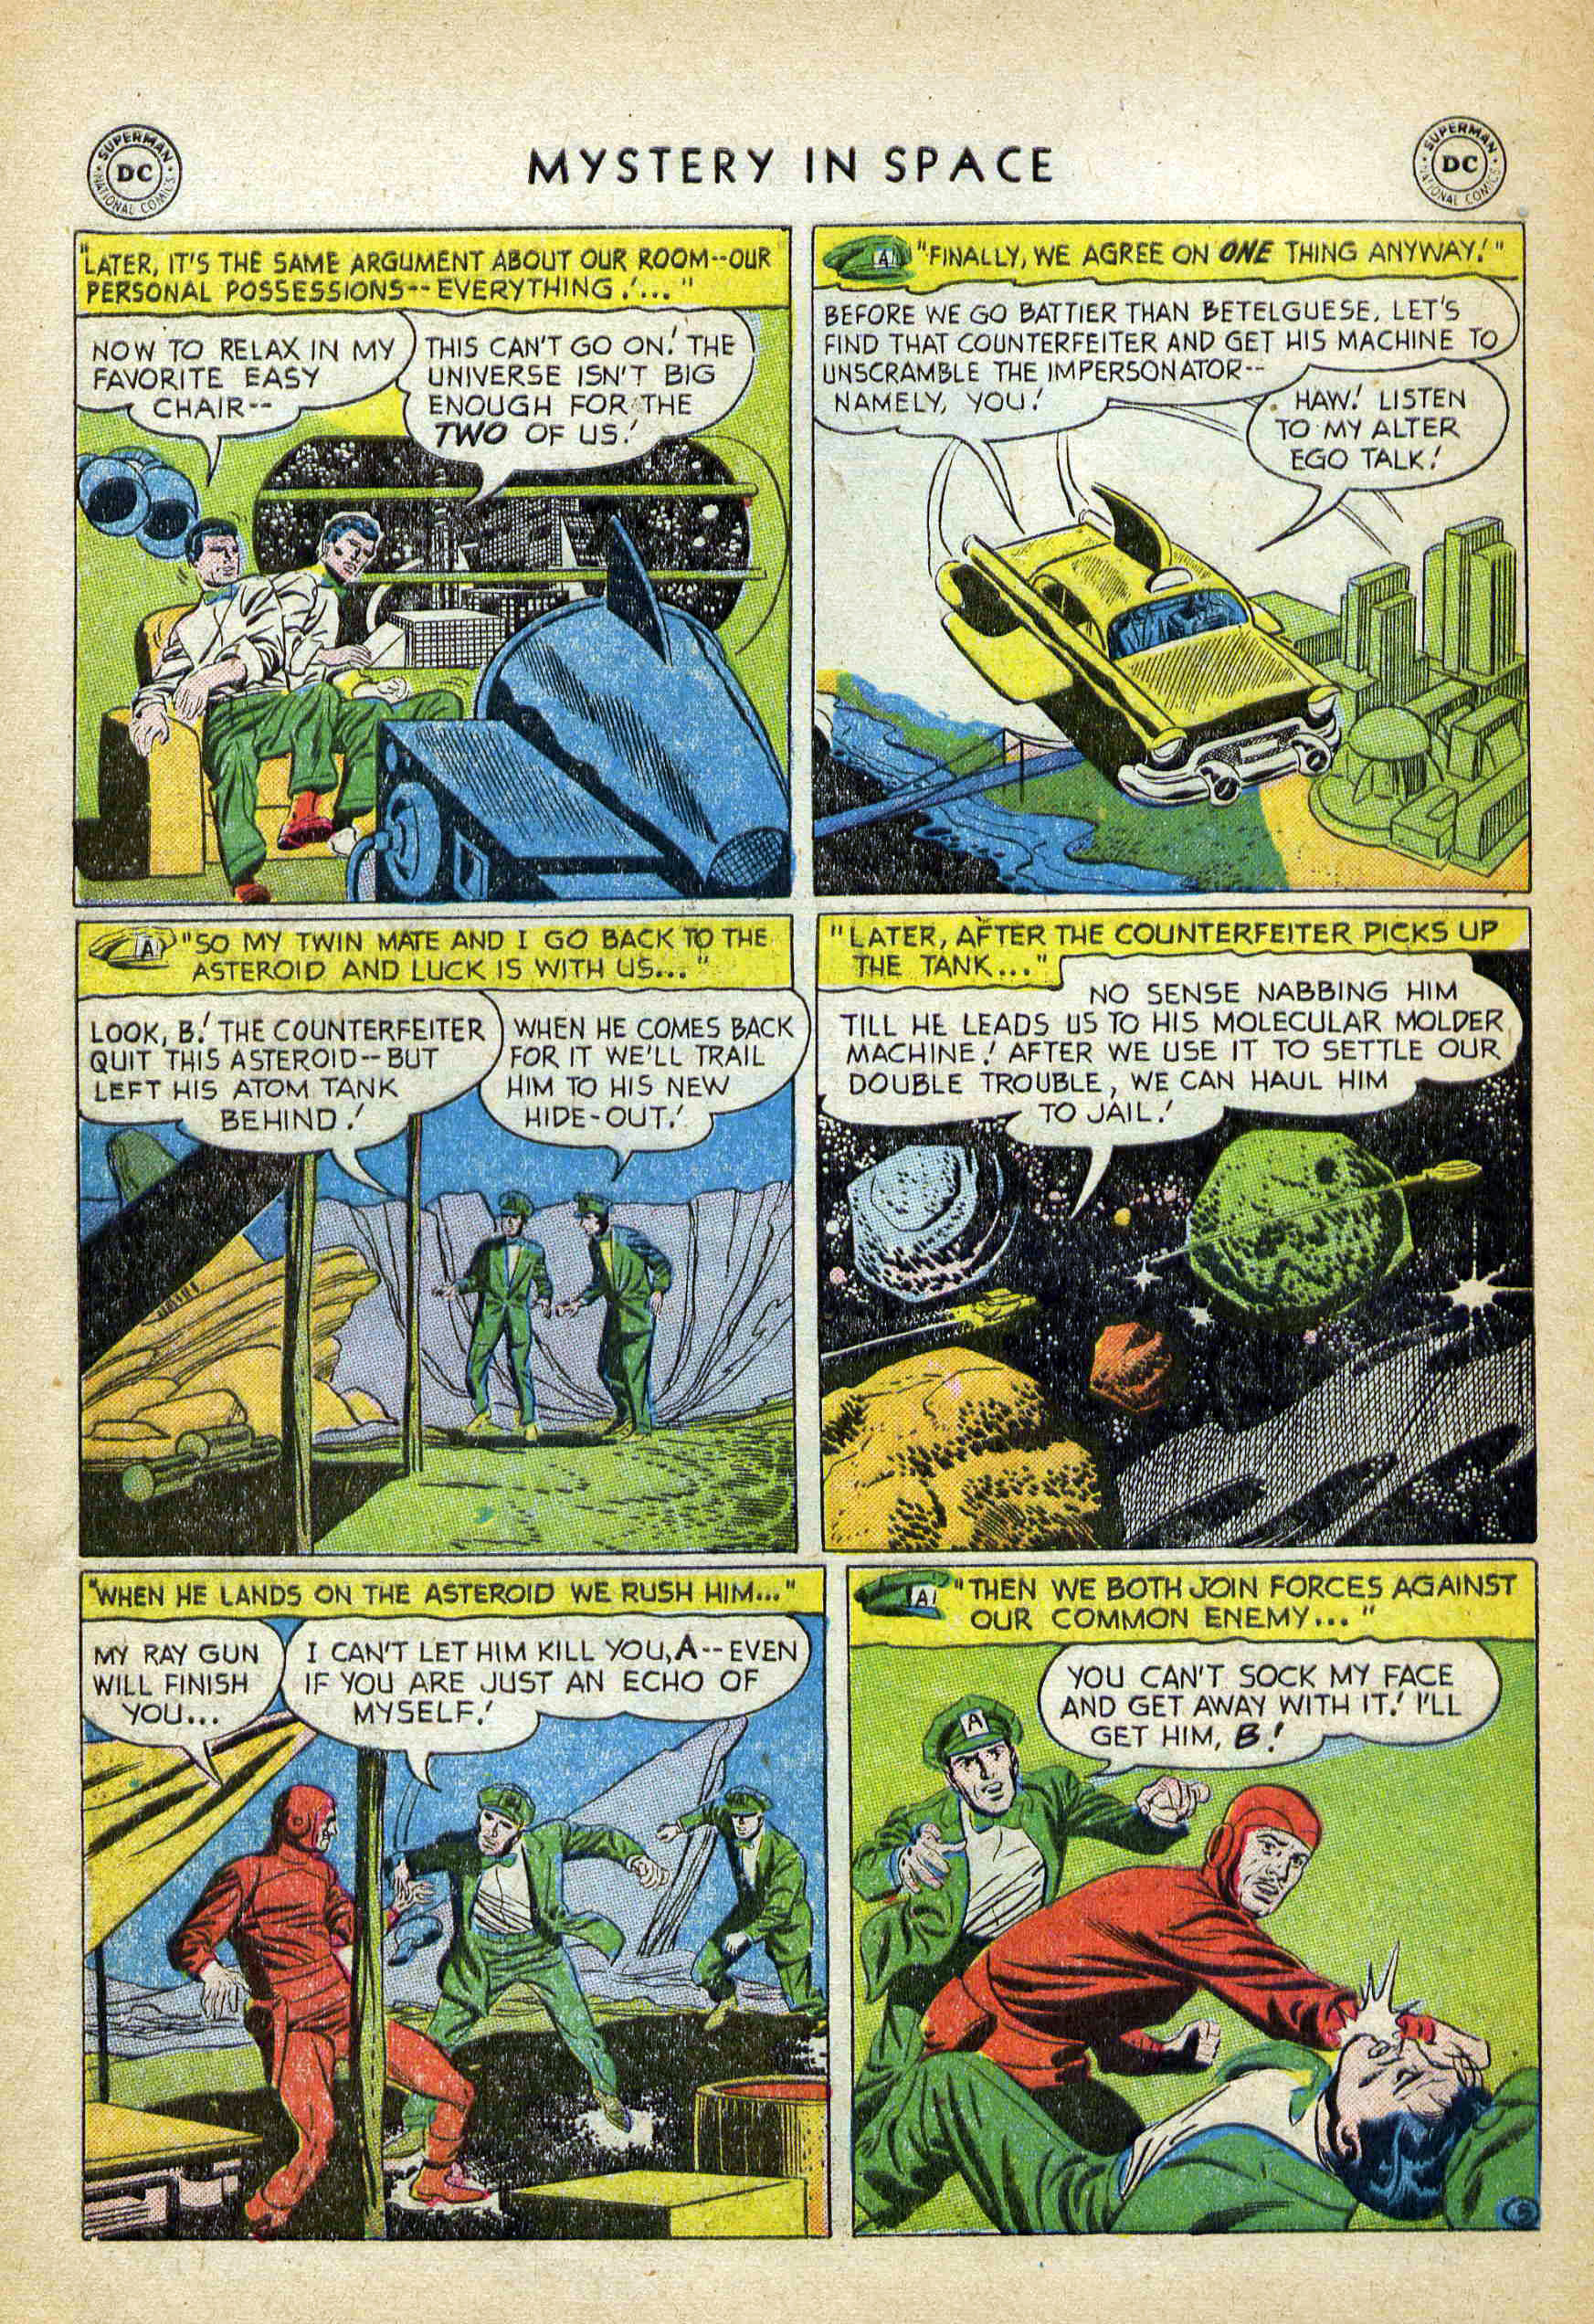 Mystery in Space (1951) 26 Page 31